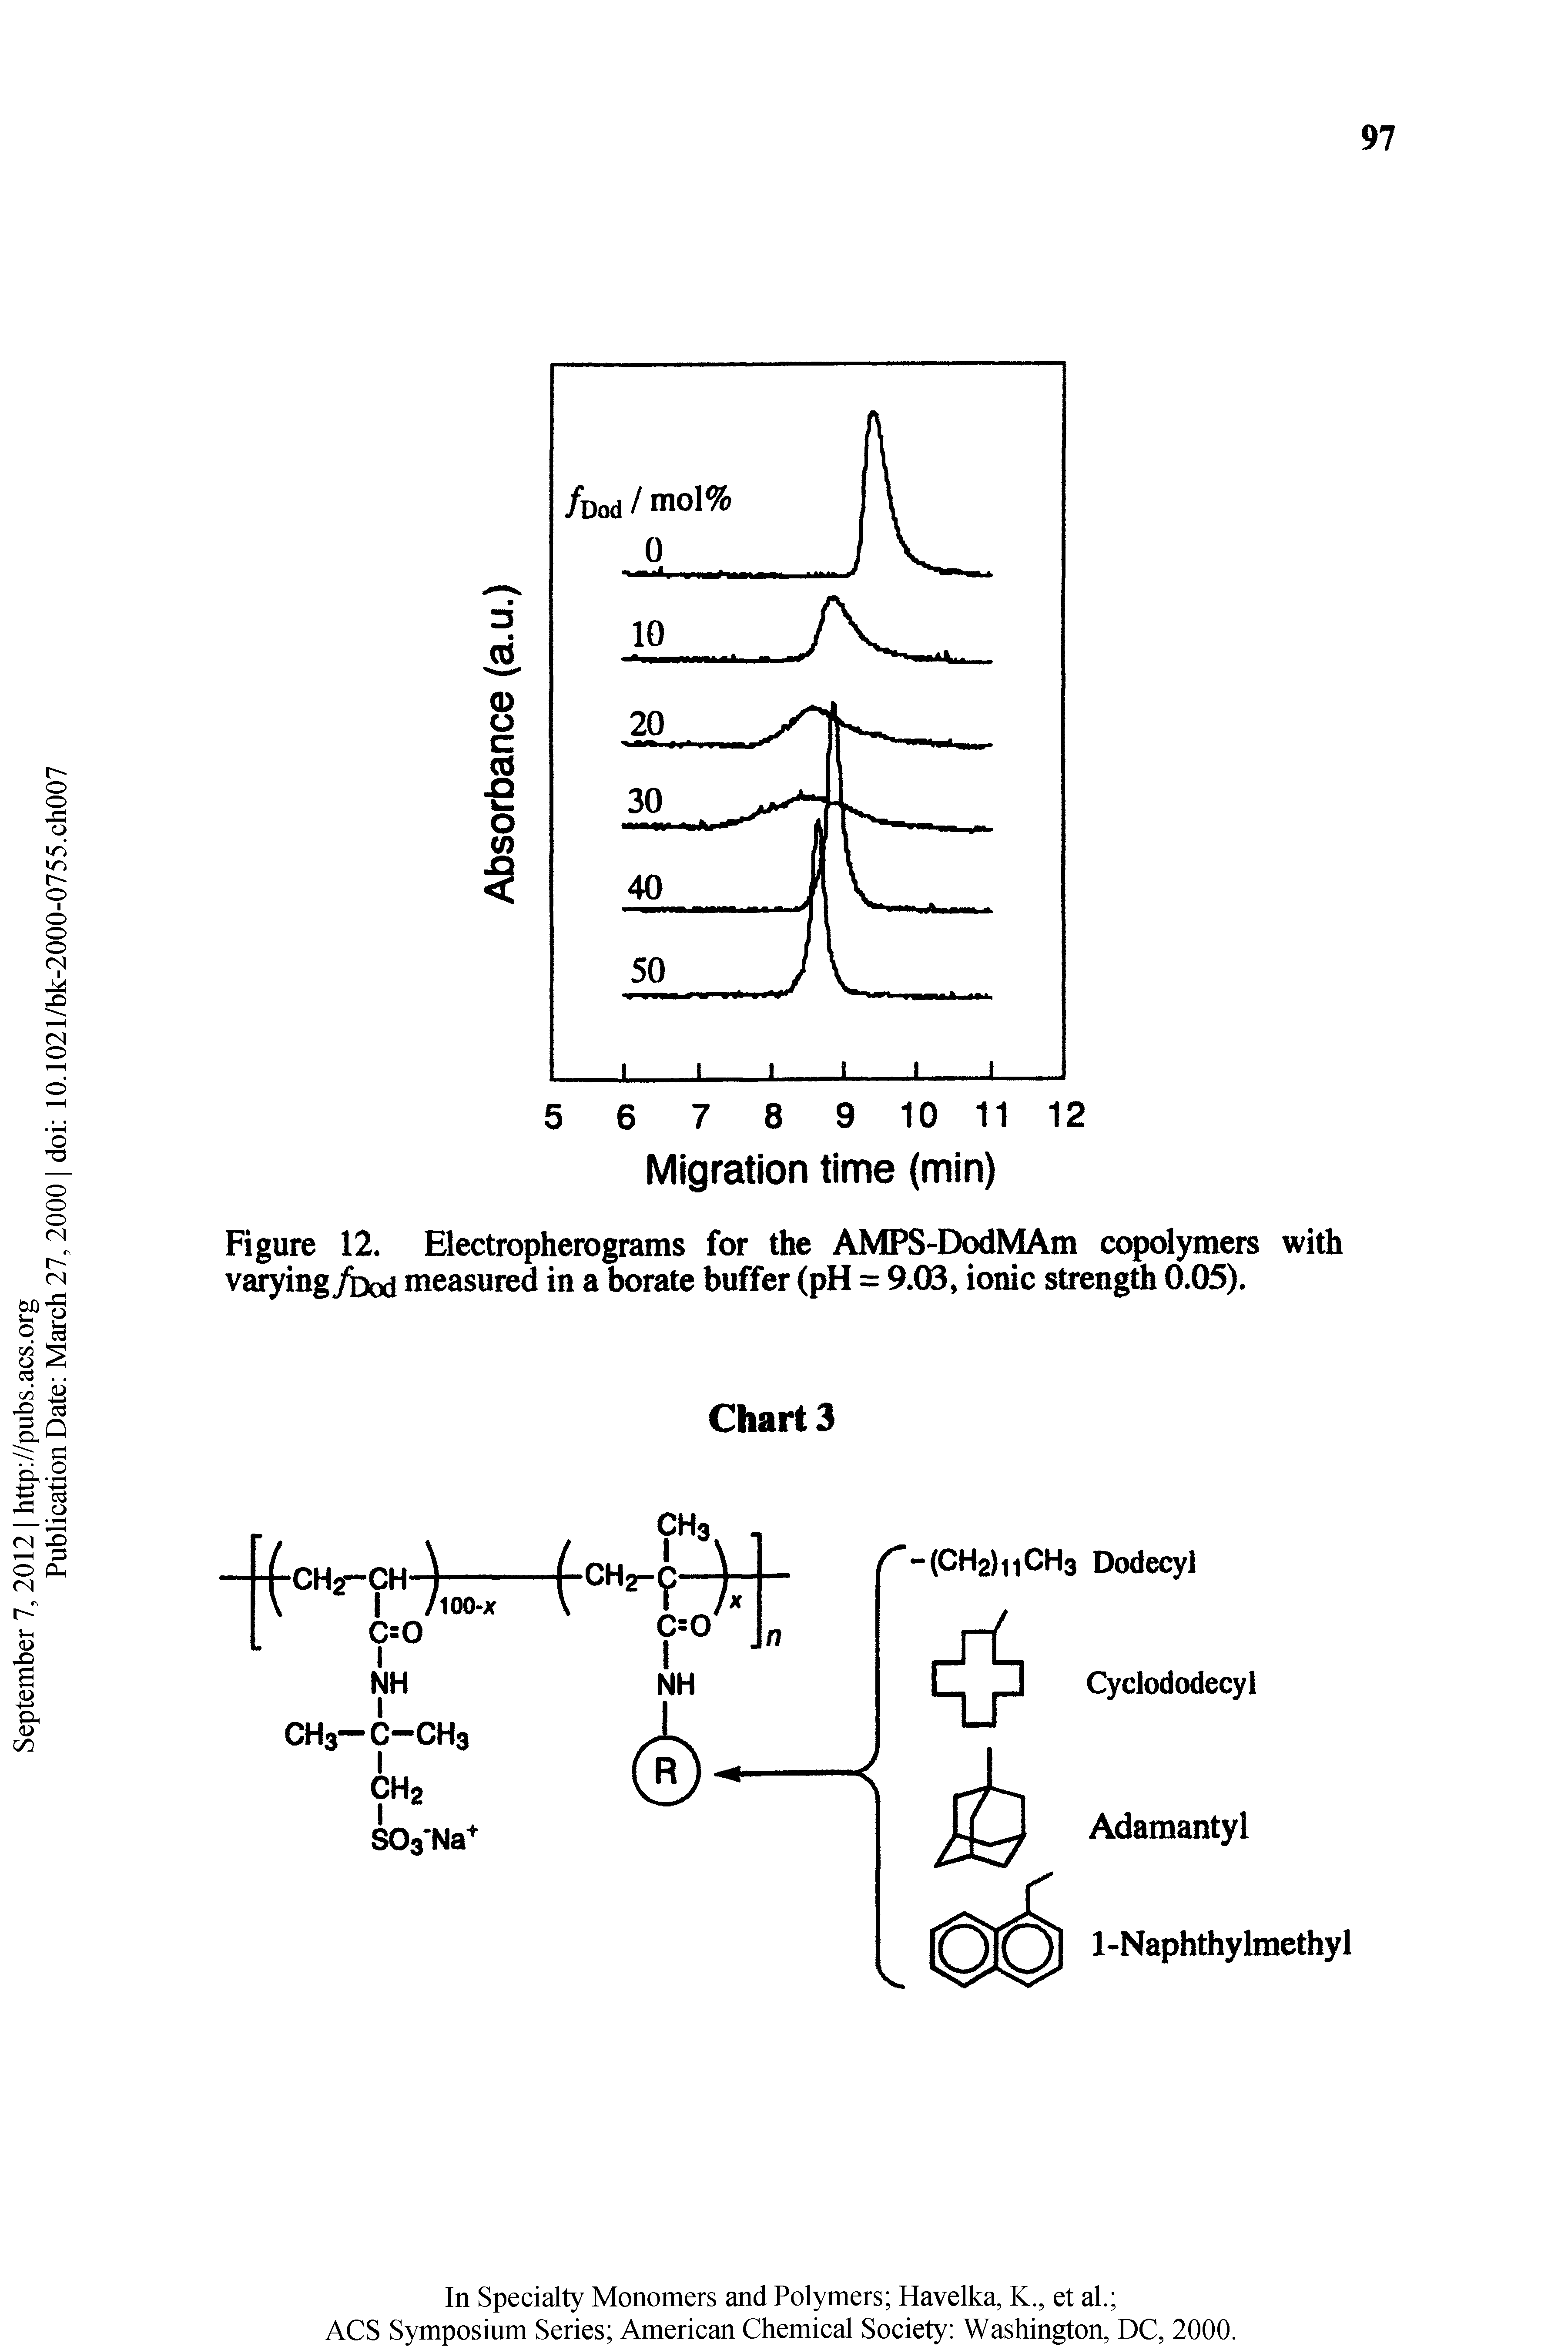 Figure 12. Electropherograms for the AMPS-DodMAm copolymers with varying/bod measured in a borate buffer (pH = 9.03, ionic strength 0.05).